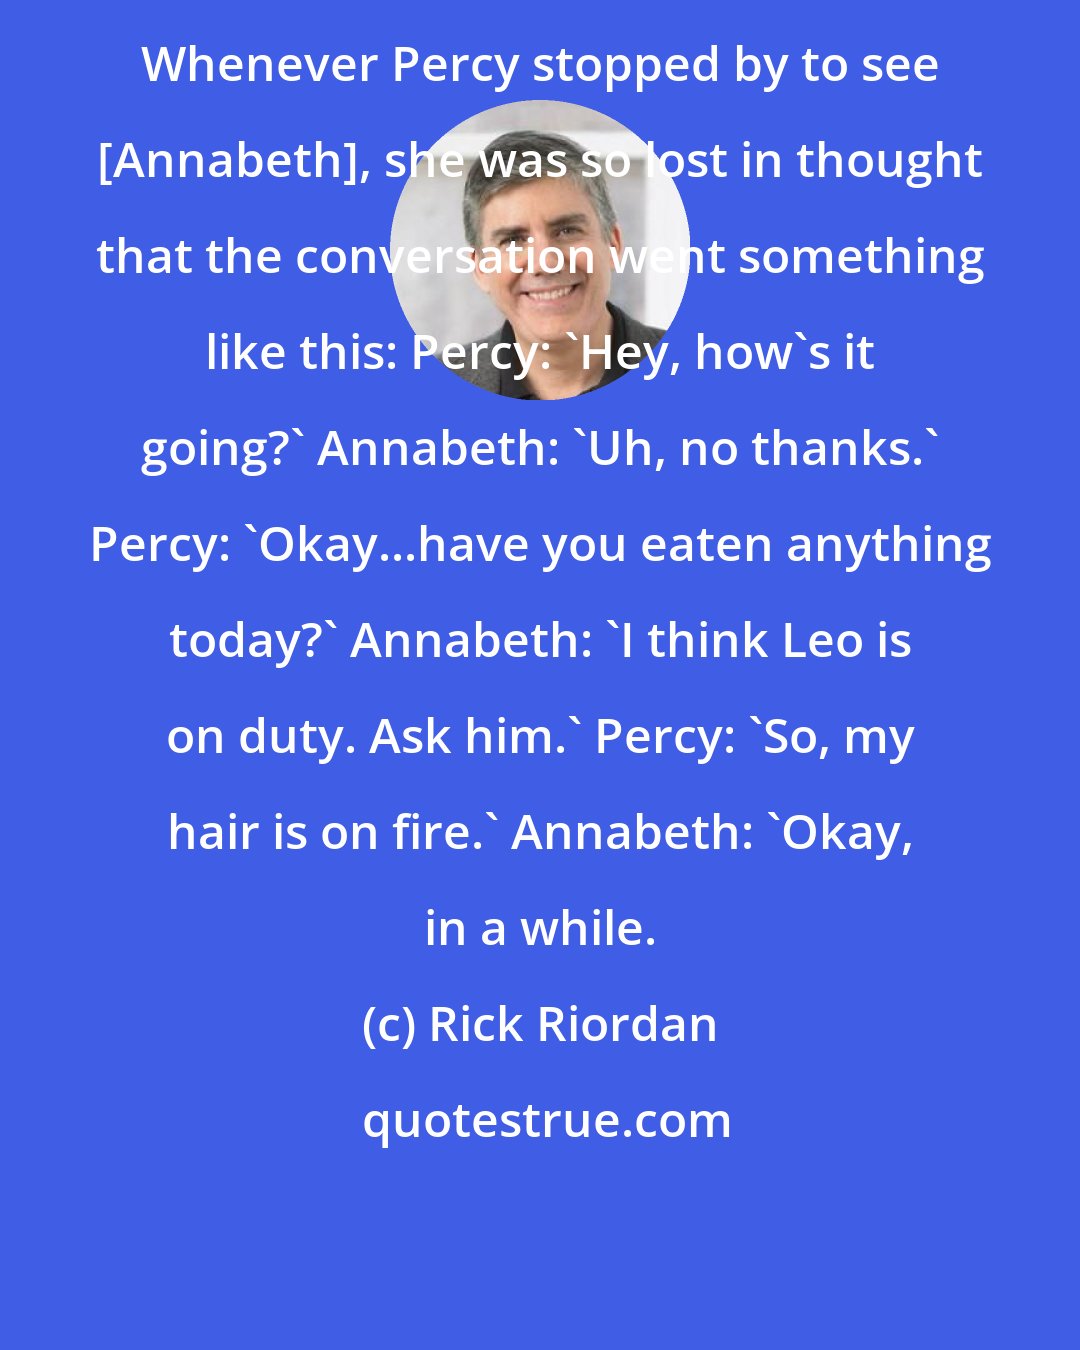 Rick Riordan: Whenever Percy stopped by to see [Annabeth], she was so lost in thought that the conversation went something like this: Percy: 'Hey, how's it going?' Annabeth: 'Uh, no thanks.' Percy: 'Okay...have you eaten anything today?' Annabeth: 'I think Leo is on duty. Ask him.' Percy: 'So, my hair is on fire.' Annabeth: 'Okay, in a while.